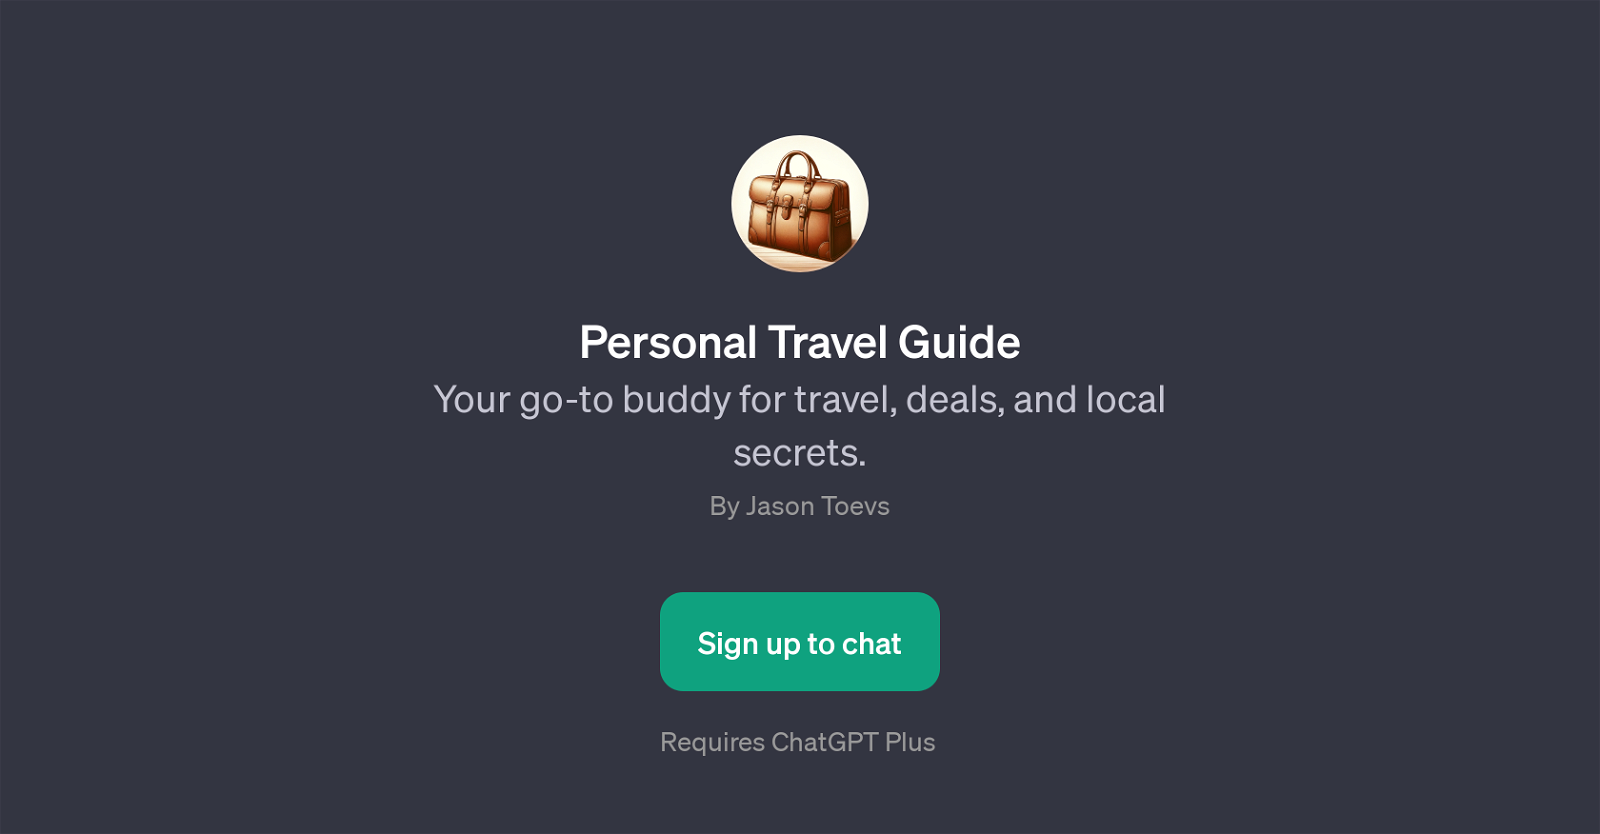 Personal Travel Guide website